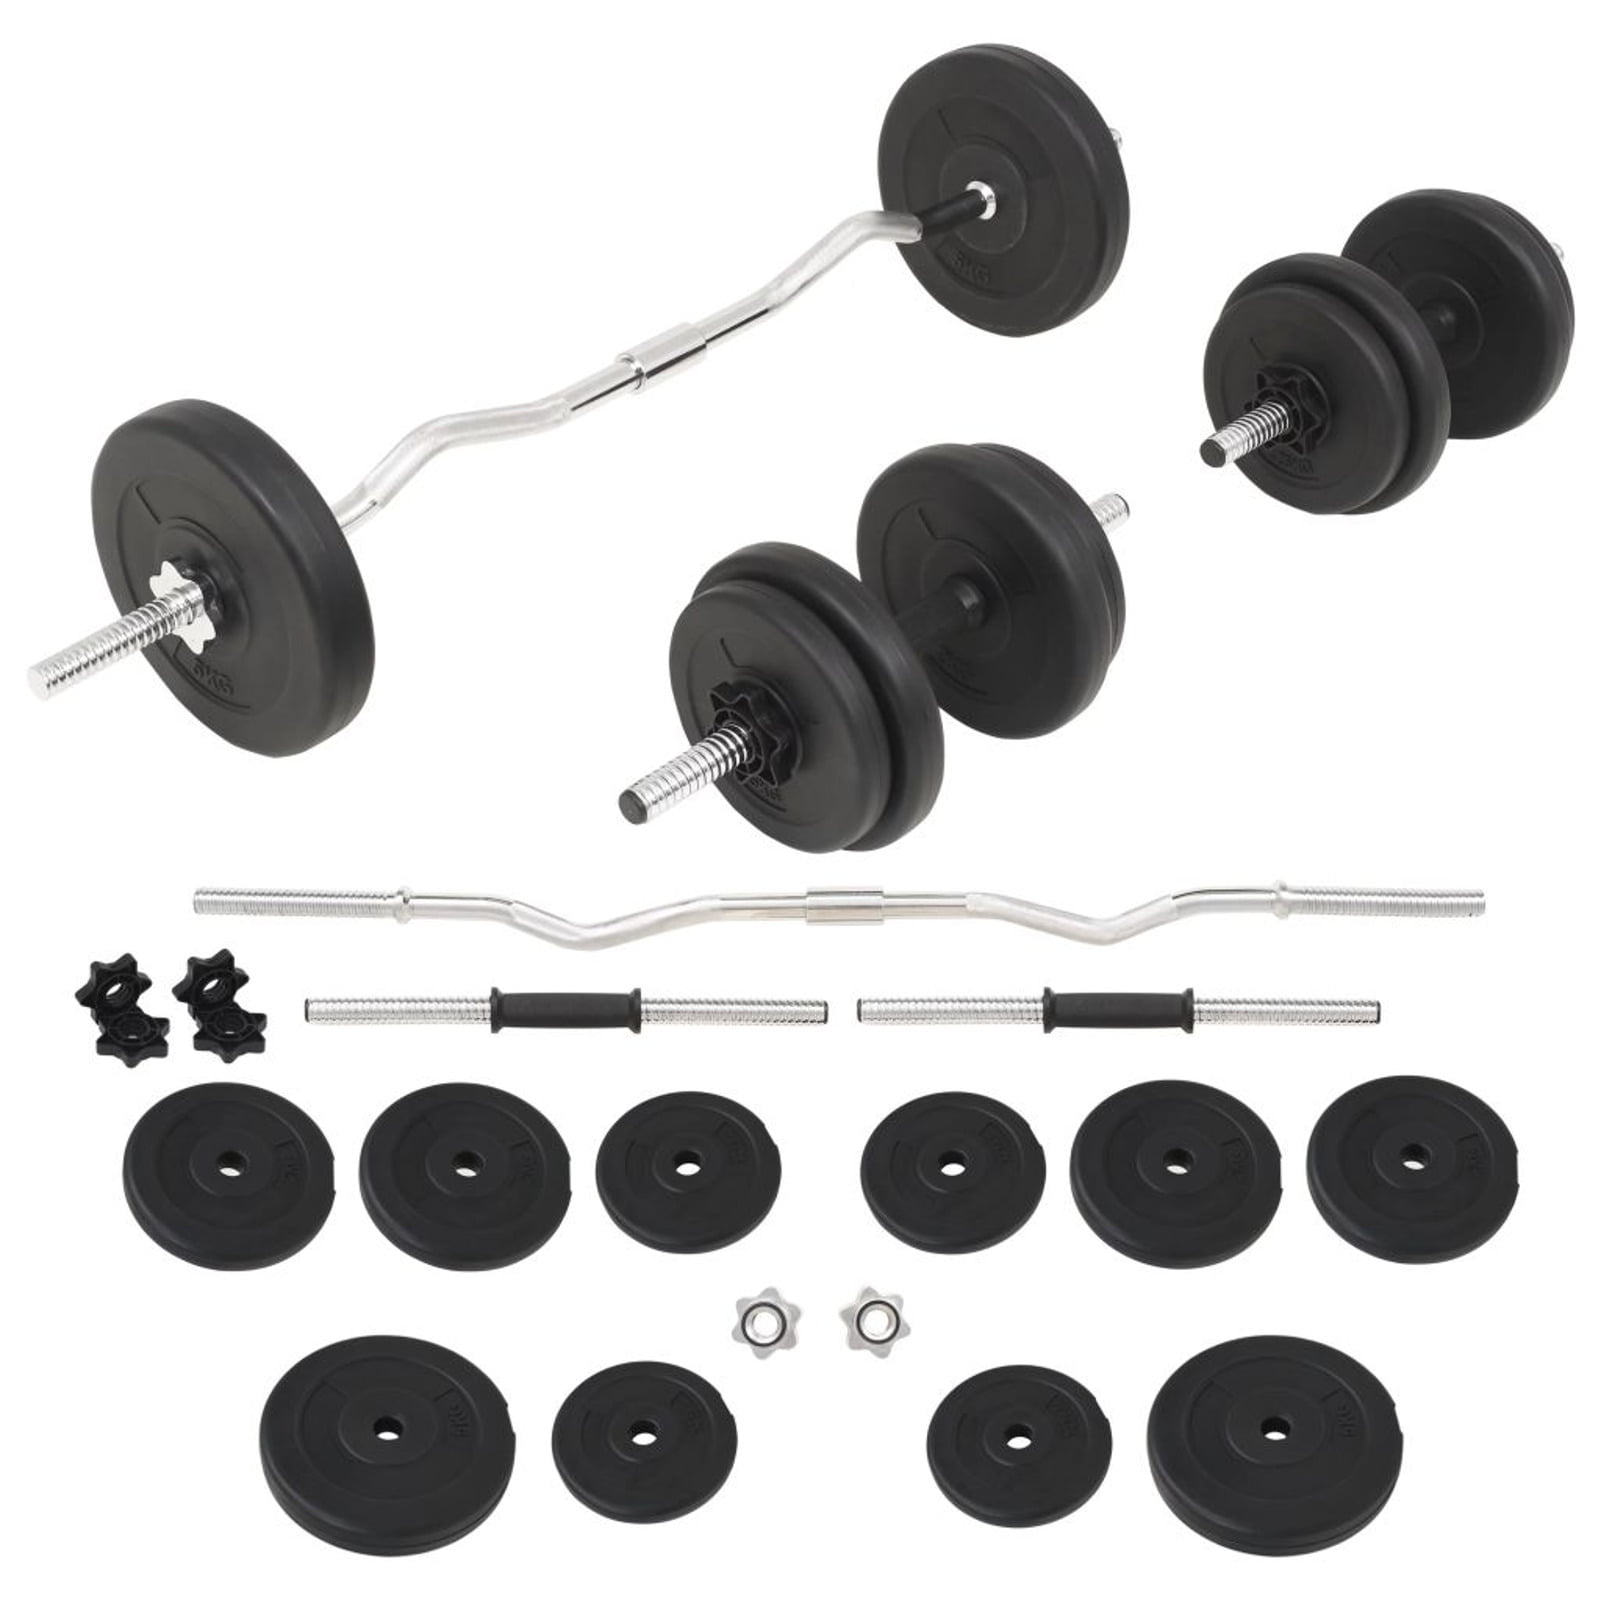 Details about   44lb Weight Dumbbell Set Adjustable Fitness GYM Home Cast Full Iron Steel Plates 